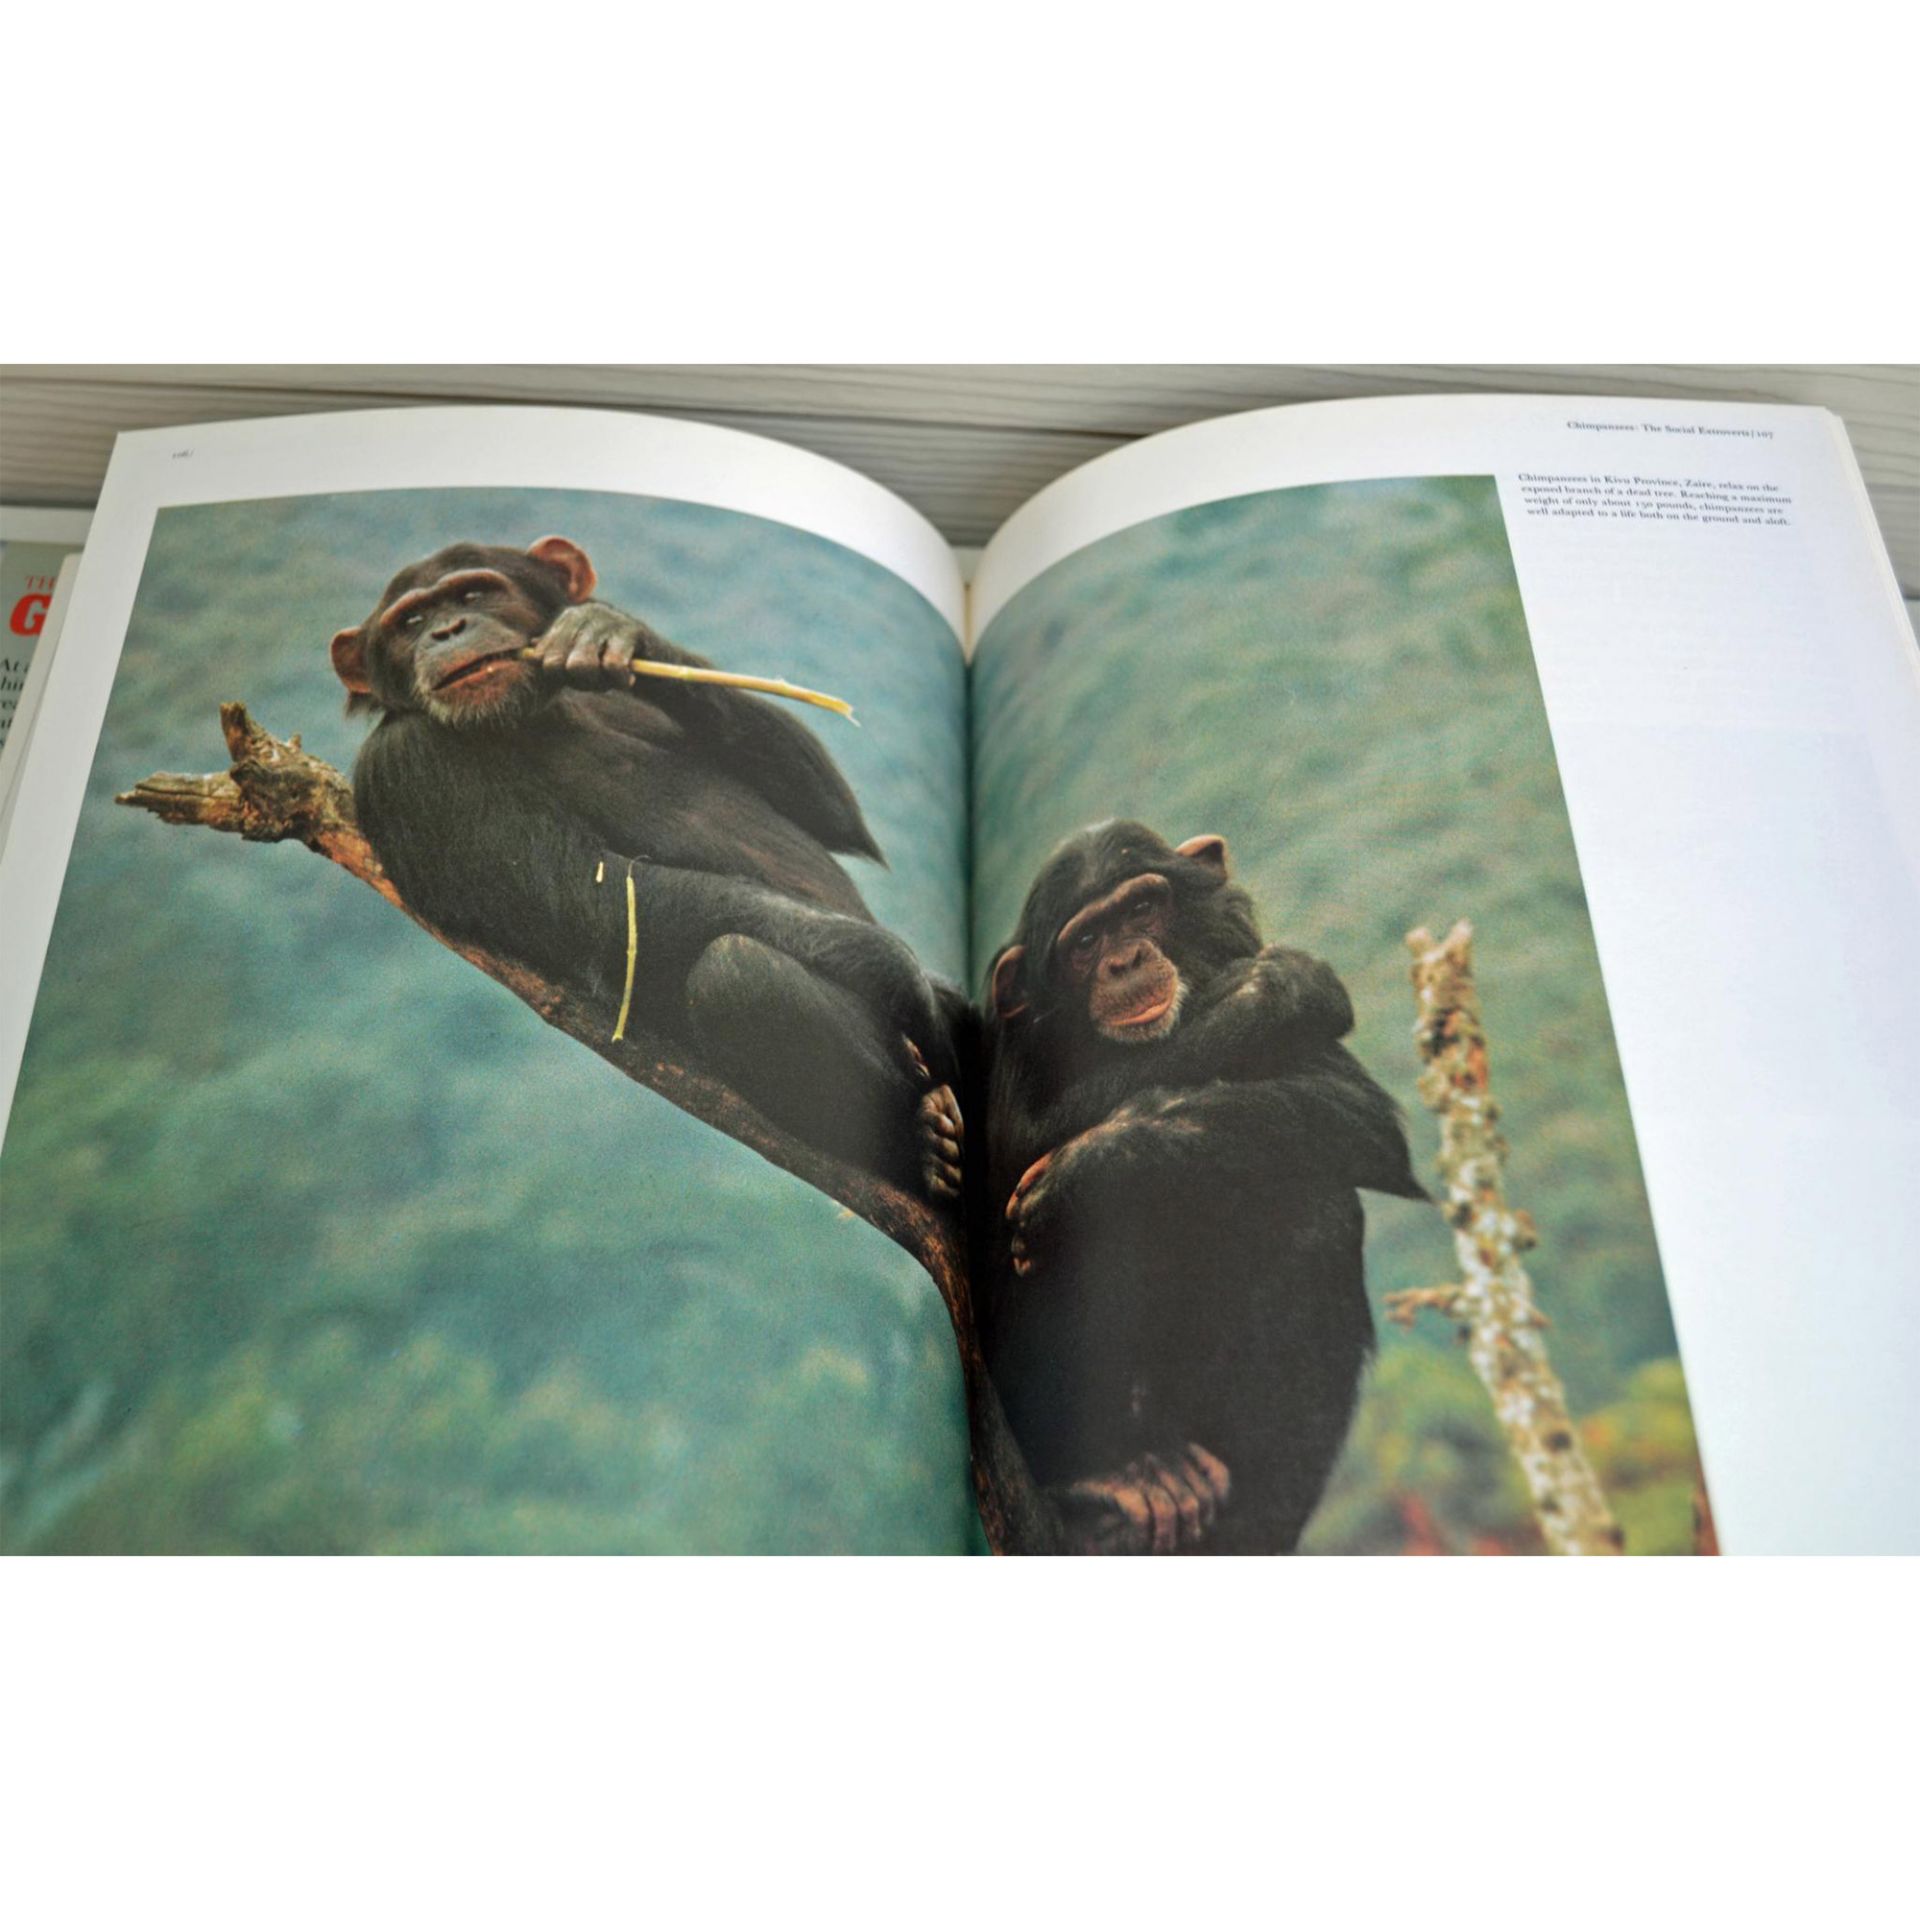 Seven Coffee Table Books, A Collection Of Birds, Animals, The National Audubon Society, The Great Ap - Image 7 of 8